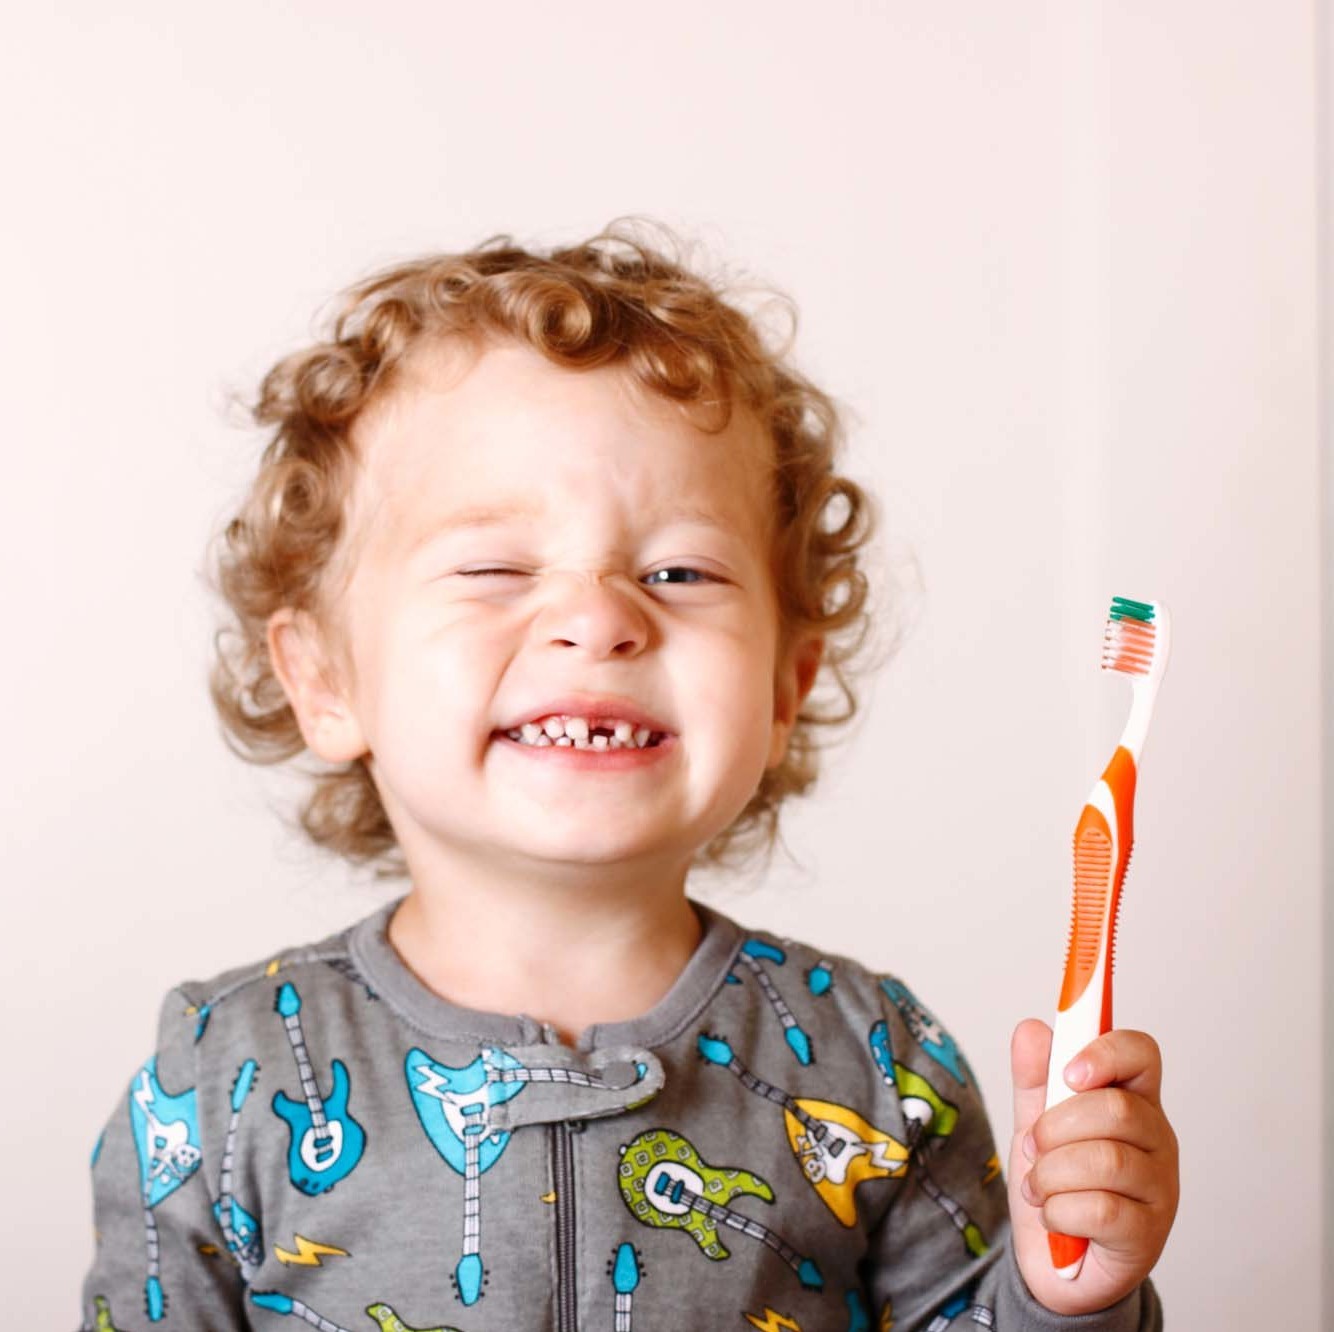 Cheesy Grin, Real People, Toddler, Preschool Age, Brushing Teeth, Bedtime, Morning, One Boy Only, Boys, Gap Toothed, Dental Health, Color Image, 15-18 Months, 2-3 Years, Child, Smiling, Getting Dressed, Caucasian Ethnicity, Preparation, Happiness, White, Looking At Camera, Horizontal, Cheerful, Blue Eyes, Human Teeth, Blond Hair, Curly Hair, Offspring, People, Night, Door, Domestic Bathroom, Toothbrush, Pajamas, Mirror, Lifestyle, People, Babies And Children